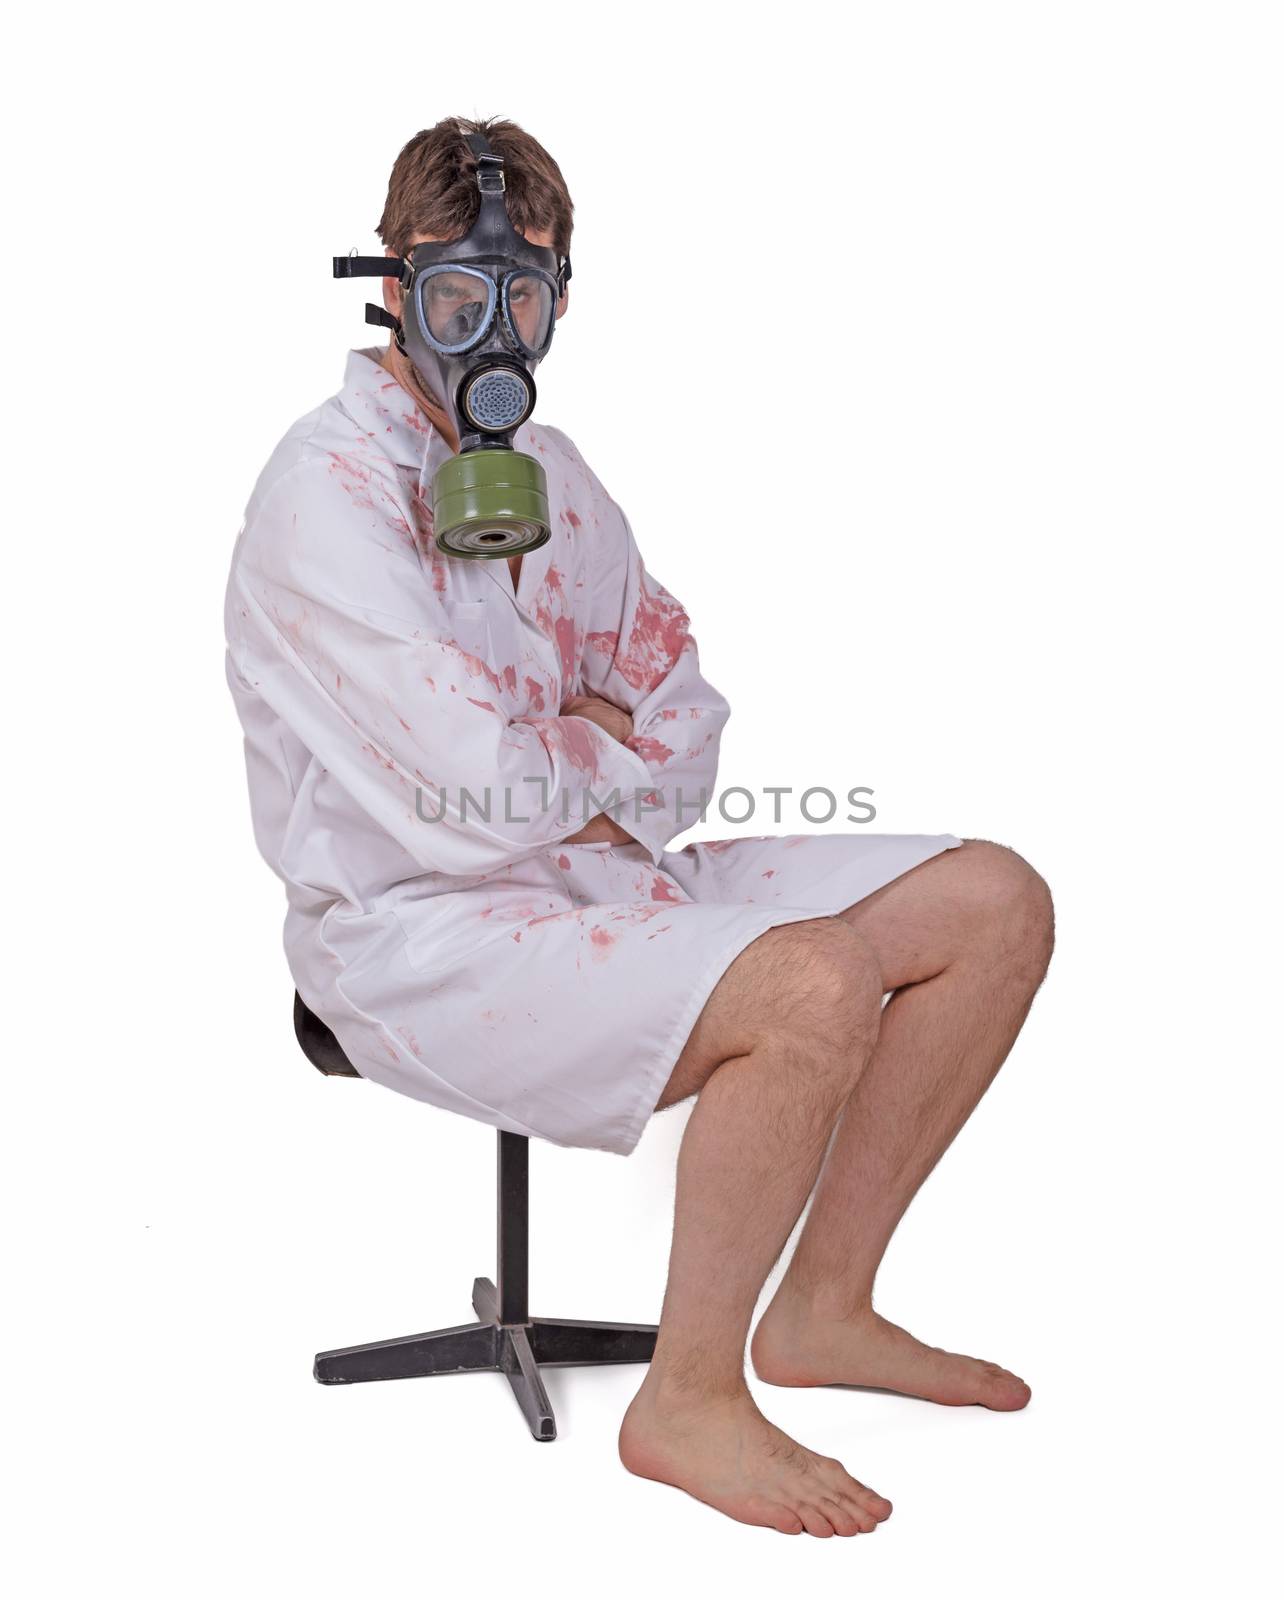 Man wearing gas mask and bloody doctors coat sitting on small chair, isolated